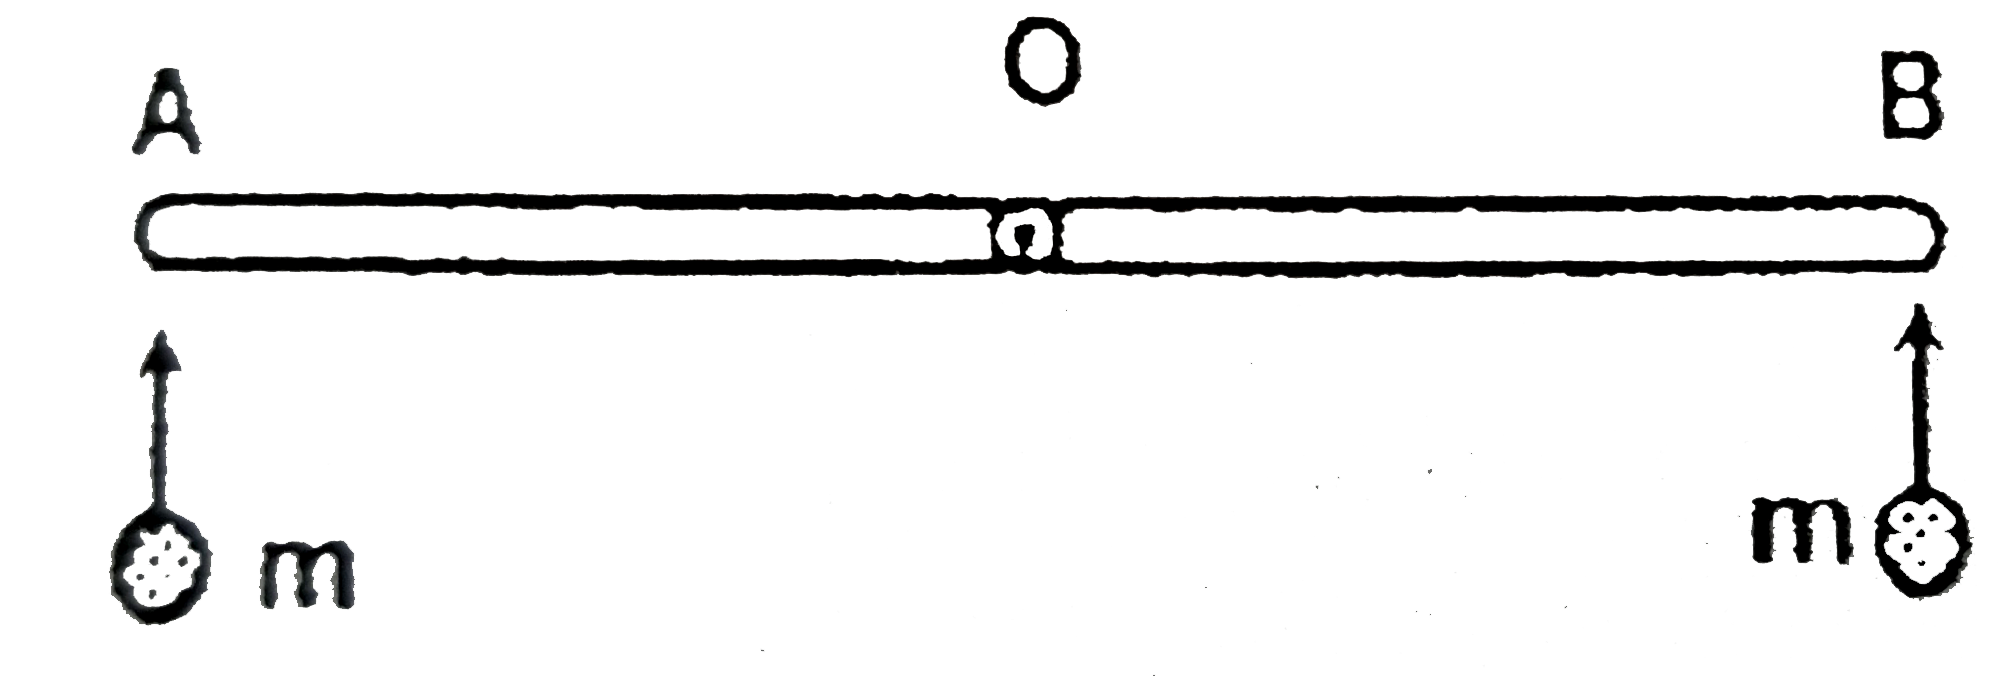 Two identical unifrom rods OA and OB each of length l and mass m are connected to each other by a massless pin connection (both the rods can rotate about O which is free to move), that allows free rotation. The assembly is kept on a frictionless horizontal plane. Now two point masses each of mass m moving with speed u perpendicular to the AB and hit the assembly inelastically at points A and B as shown in the figure.       Find the angular speed of rods just after the collision